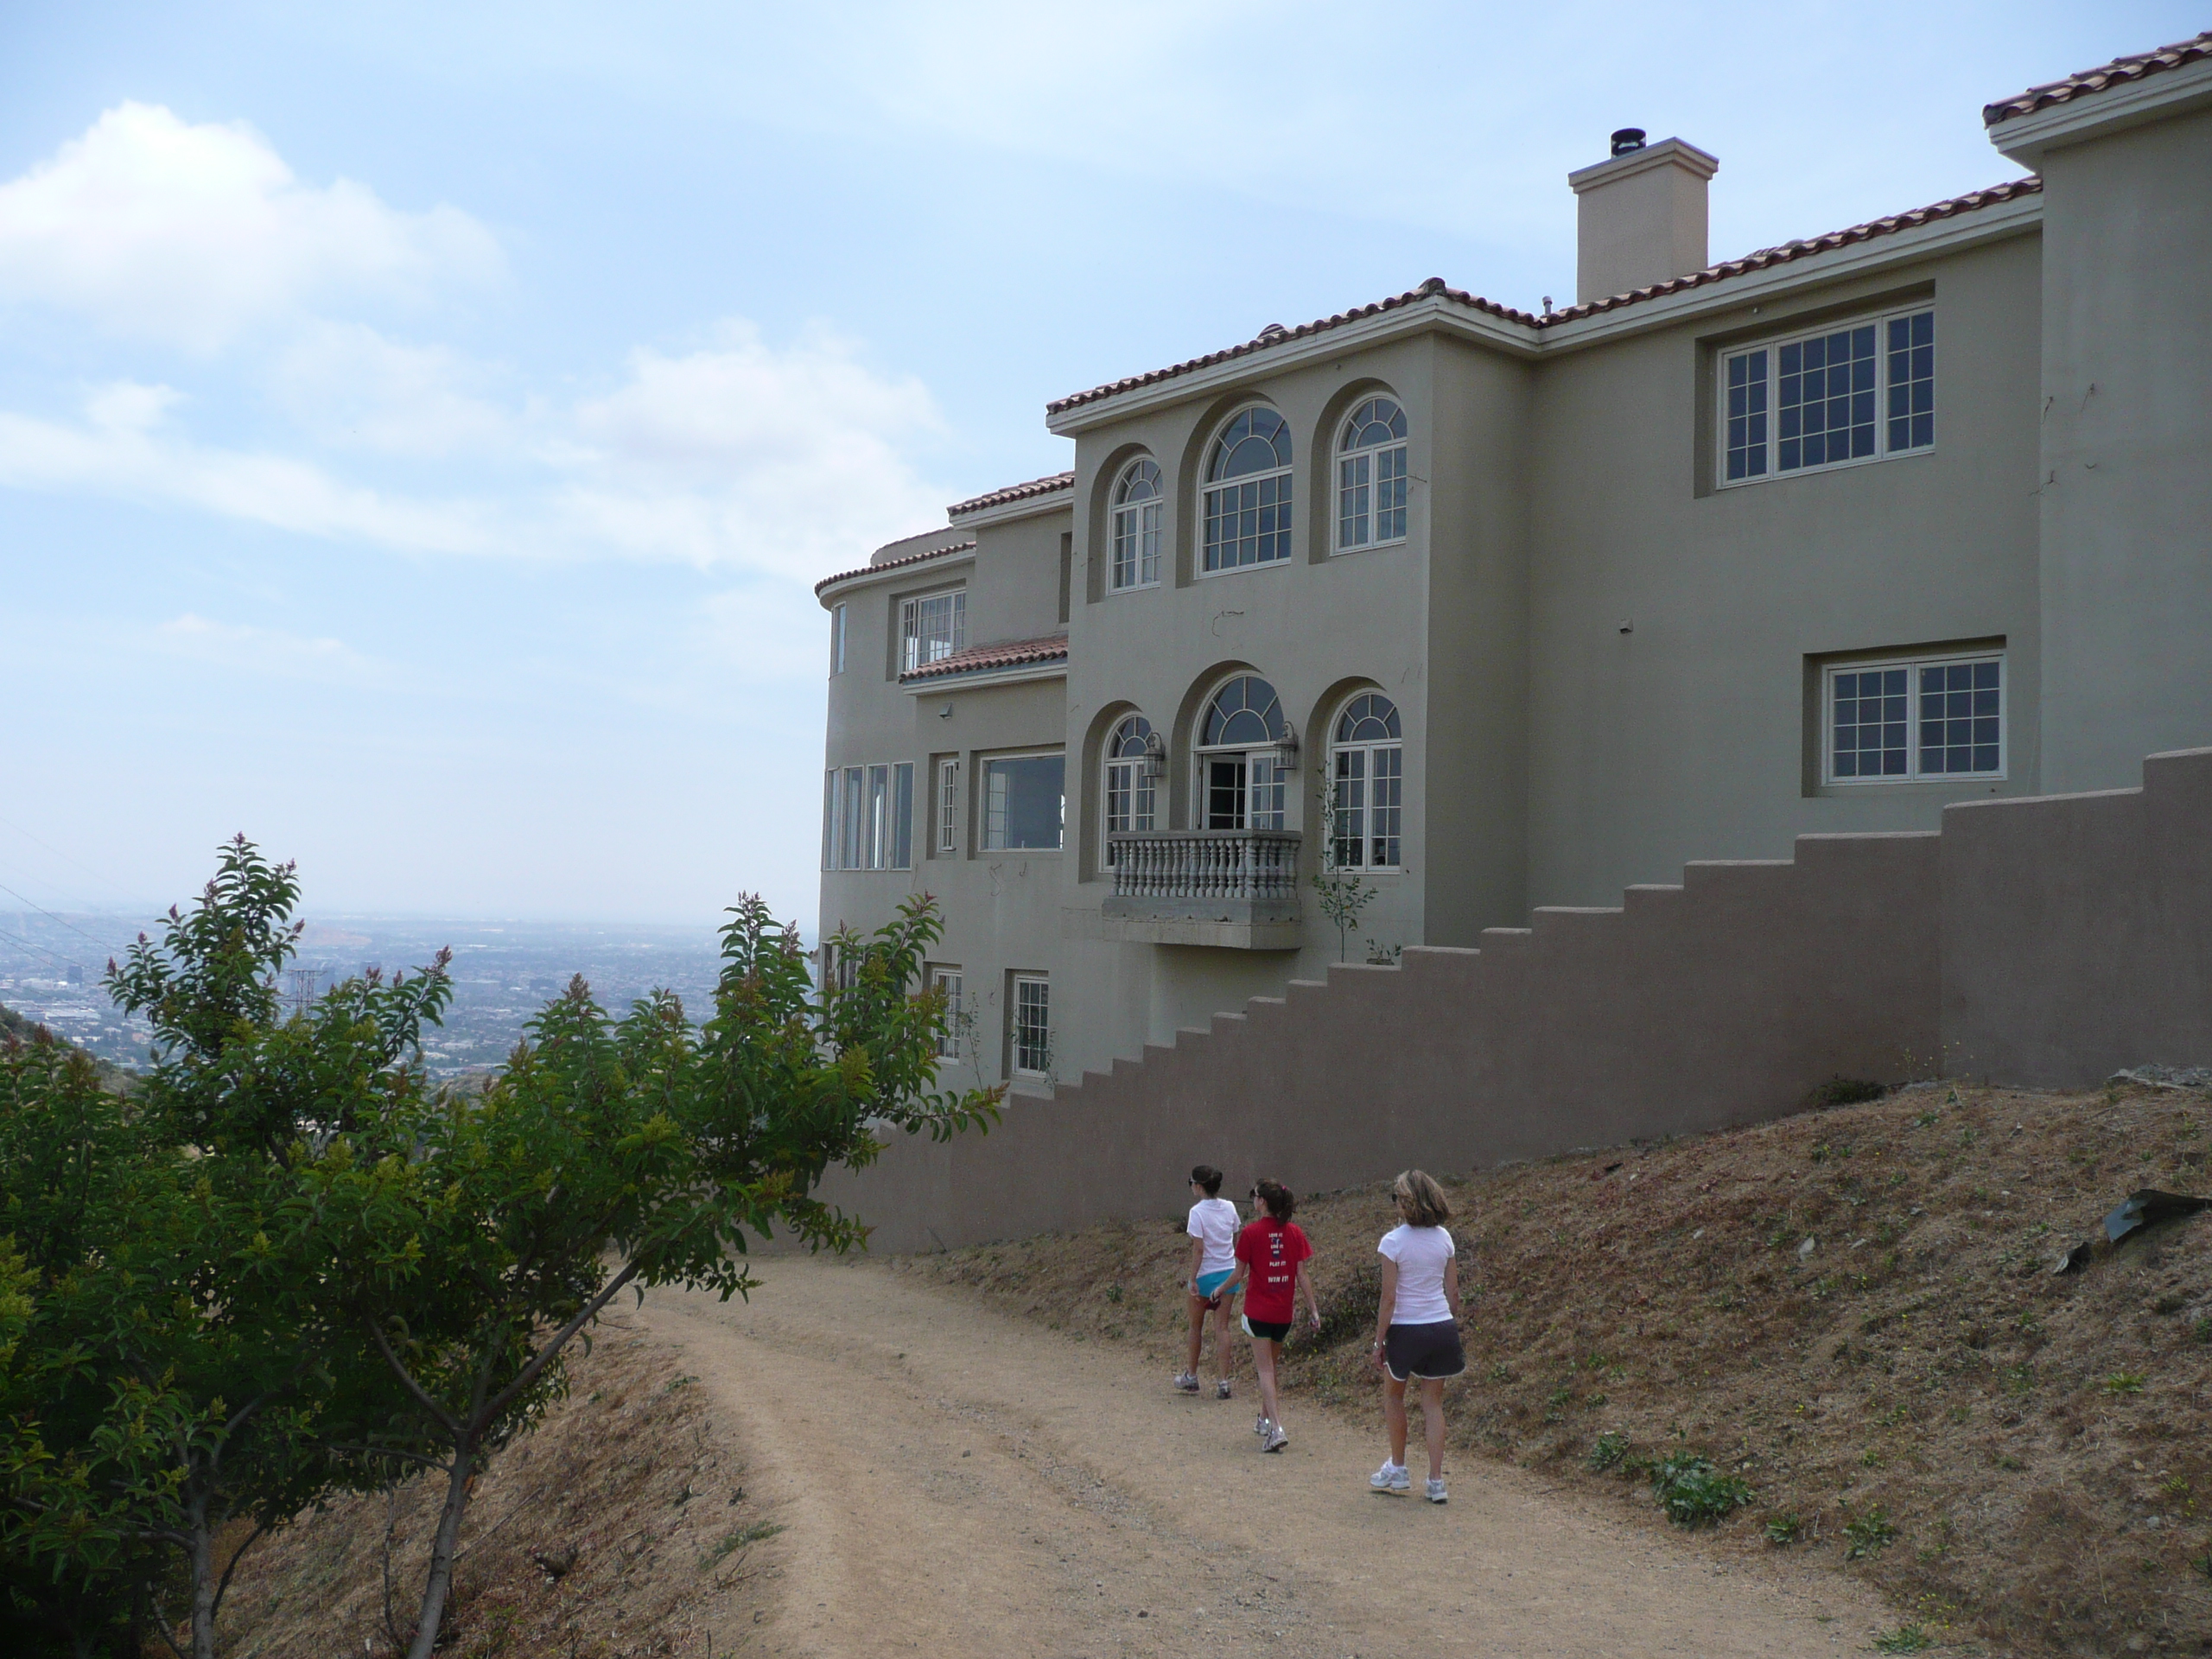 Hikers walk next to huge pink house